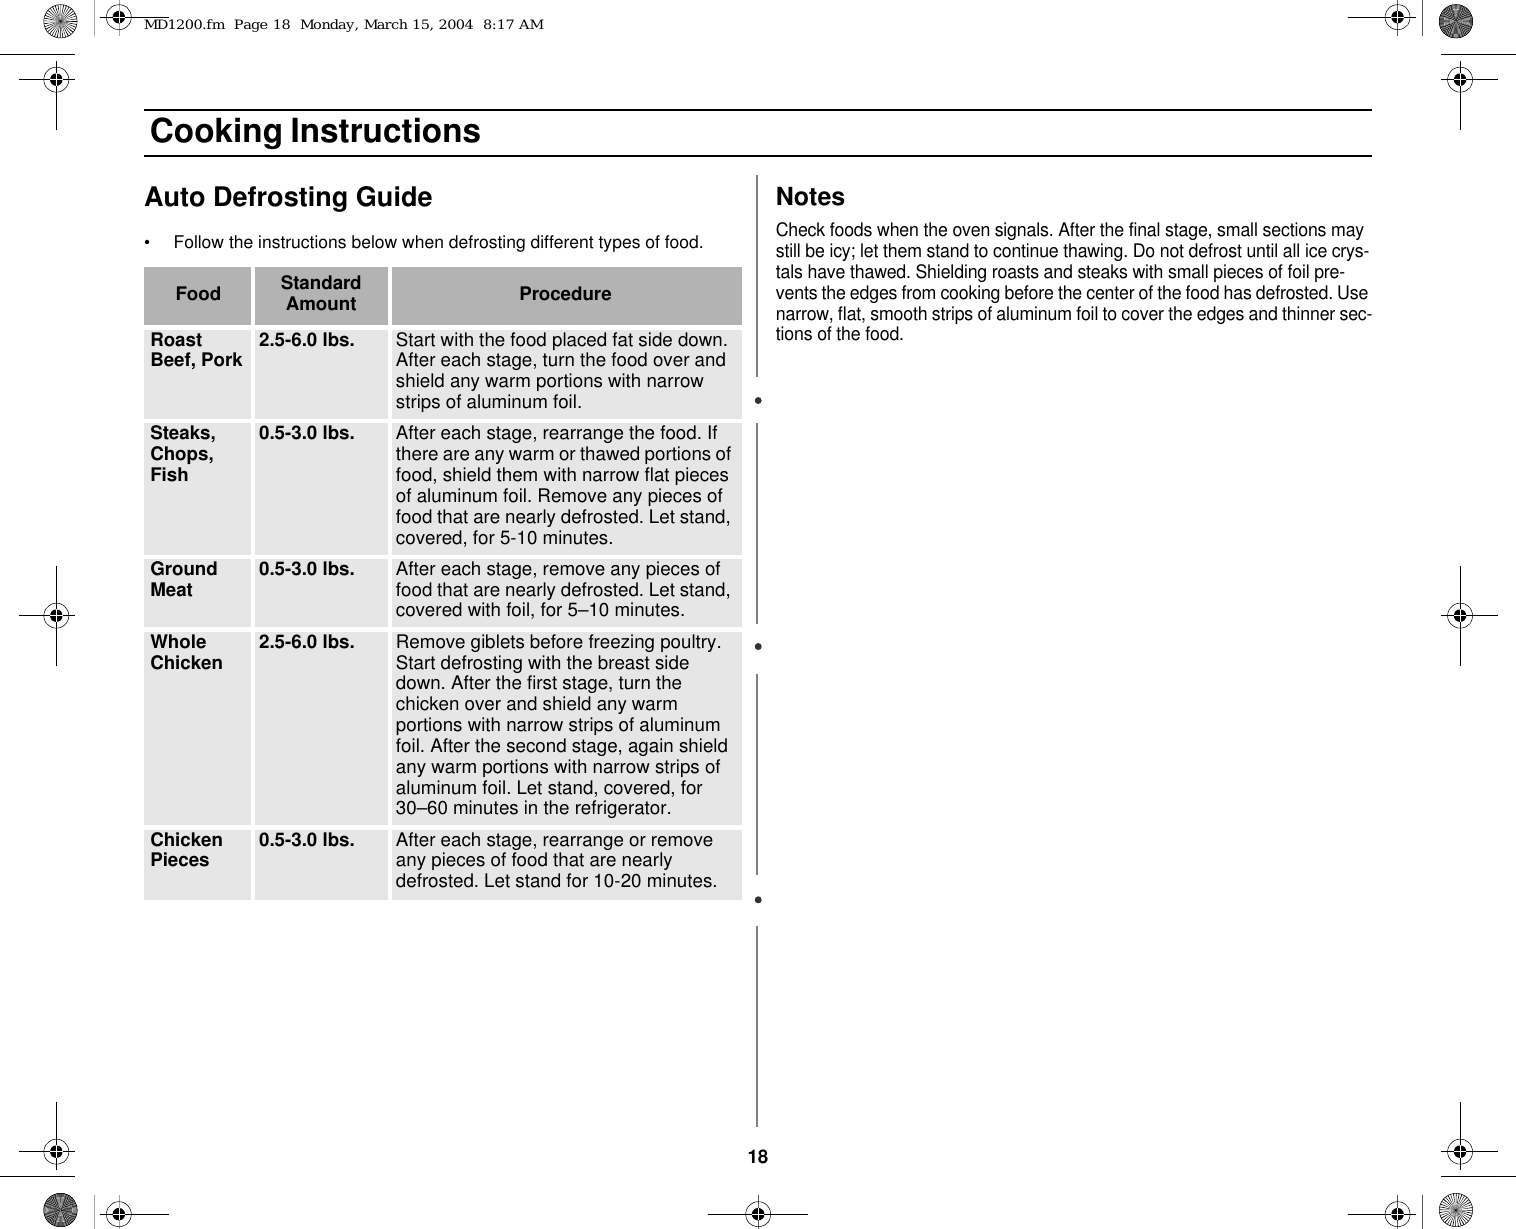 18 Cooking InstructionsAuto Defrosting Guide• Follow the instructions below when defrosting different types of food. NotesCheck foods when the oven signals. After the final stage, small sections may still be icy; let them stand to continue thawing. Do not defrost until all ice crys-tals have thawed. Shielding roasts and steaks with small pieces of foil pre-vents the edges from cooking before the center of the food has defrosted. Use narrow, flat, smooth strips of aluminum foil to cover the edges and thinner sec-tions of the food.Food Standard Amount ProcedureRoast Beef, Pork 2.5-6.0 lbs. Start with the food placed fat side down. After each stage, turn the food over and shield any warm portions with narrow strips of aluminum foil.Steaks, Chops, Fish0.5-3.0 lbs. After each stage, rearrange the food. If there are any warm or thawed portions of food, shield them with narrow flat pieces of aluminum foil. Remove any pieces of food that are nearly defrosted. Let stand, covered, for 5-10 minutes.Ground Meat 0.5-3.0 lbs. After each stage, remove any pieces of food that are nearly defrosted. Let stand, covered with foil, for 5–10 minutes.Whole Chicken  2.5-6.0 lbs. Remove giblets before freezing poultry. Start defrosting with the breast side down. After the first stage, turn the chicken over and shield any warm portions with narrow strips of aluminum foil. After the second stage, again shield any warm portions with narrow strips of aluminum foil. Let stand, covered, for 30–60 minutes in the refrigerator.Chicken Pieces 0.5-3.0 lbs. After each stage, rearrange or remove any pieces of food that are nearly defrosted. Let stand for 10-20 minutes.MD1200.fm  Page 18  Monday, March 15, 2004  8:17 AM